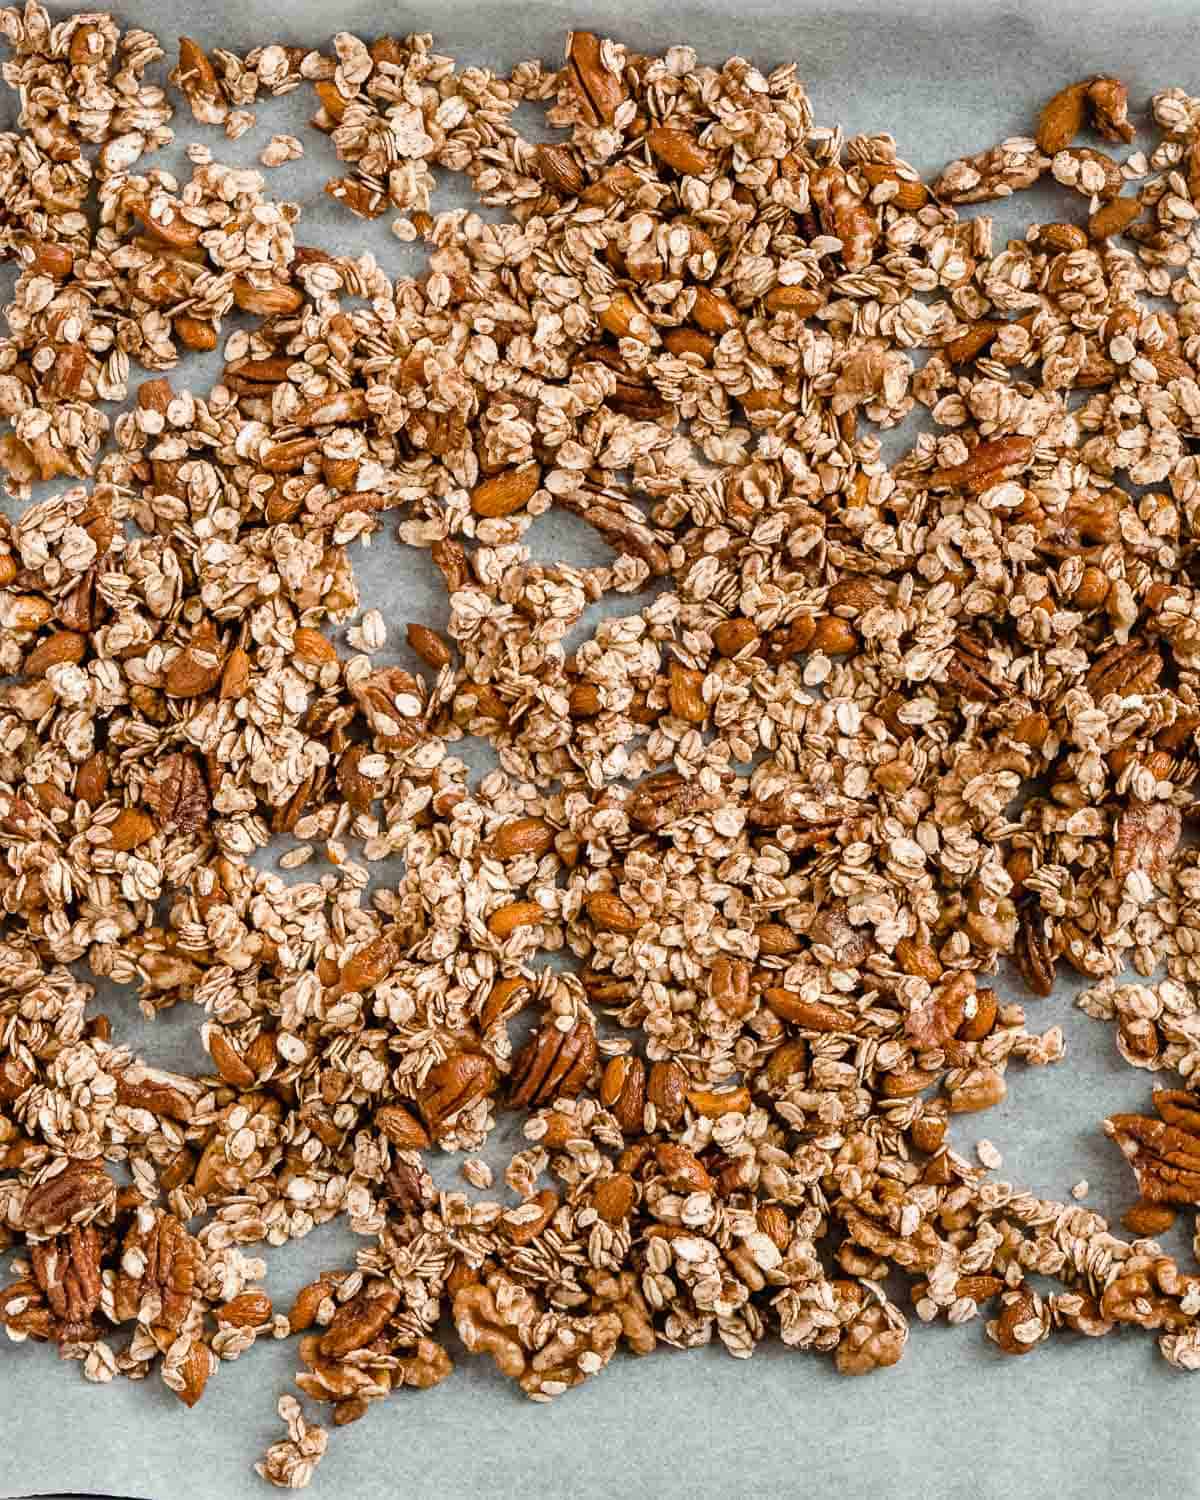 granola spread out on baking tray.